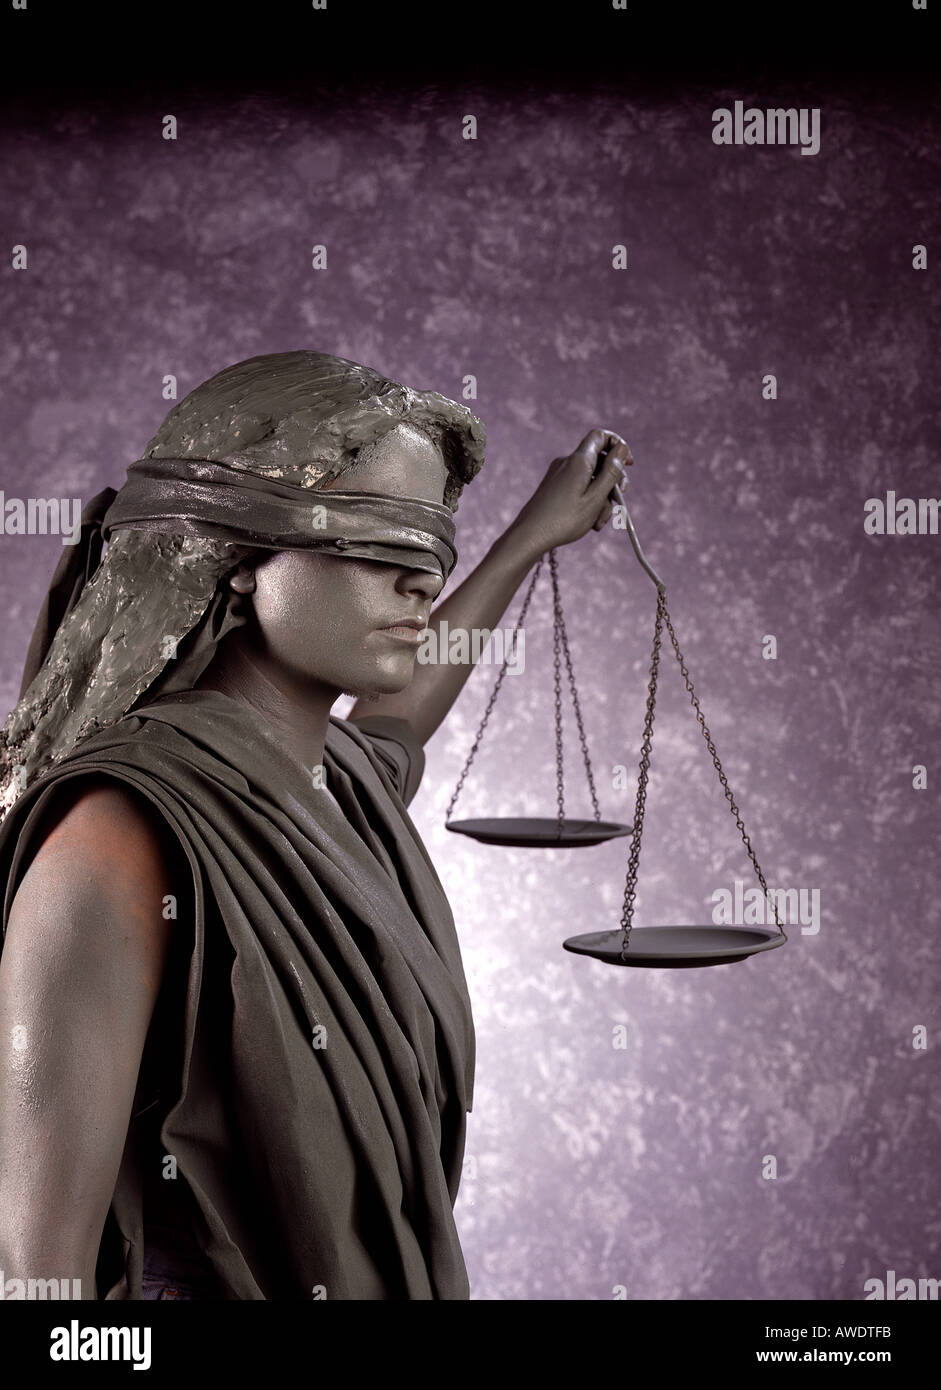 The True Meaning of Lady Justice's Blindfold < Review < Column < 기사본문 - 한양저널